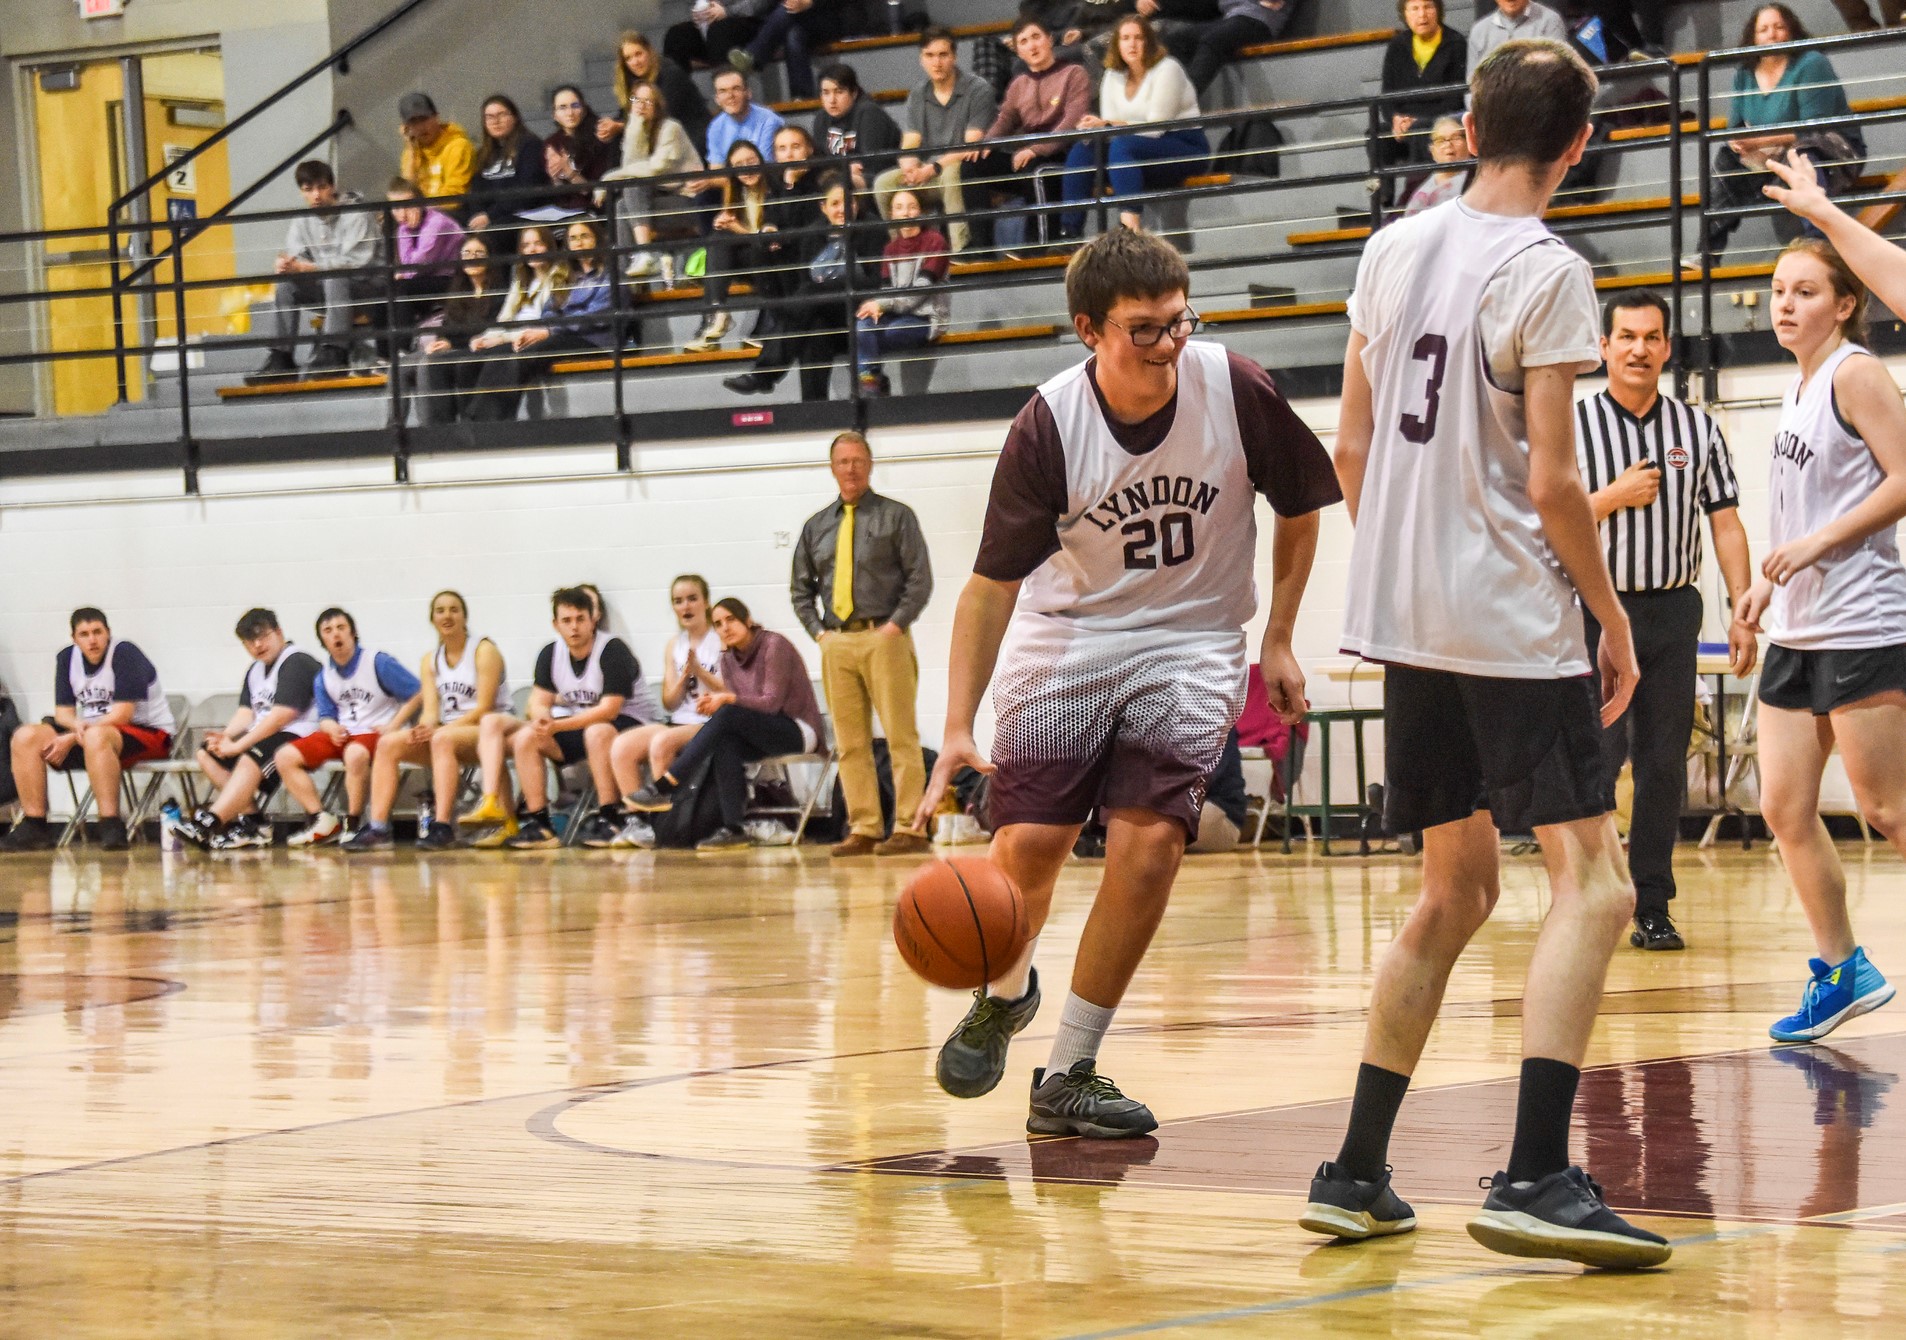 Unified Joy: Bringing Athletes and People Together at LI